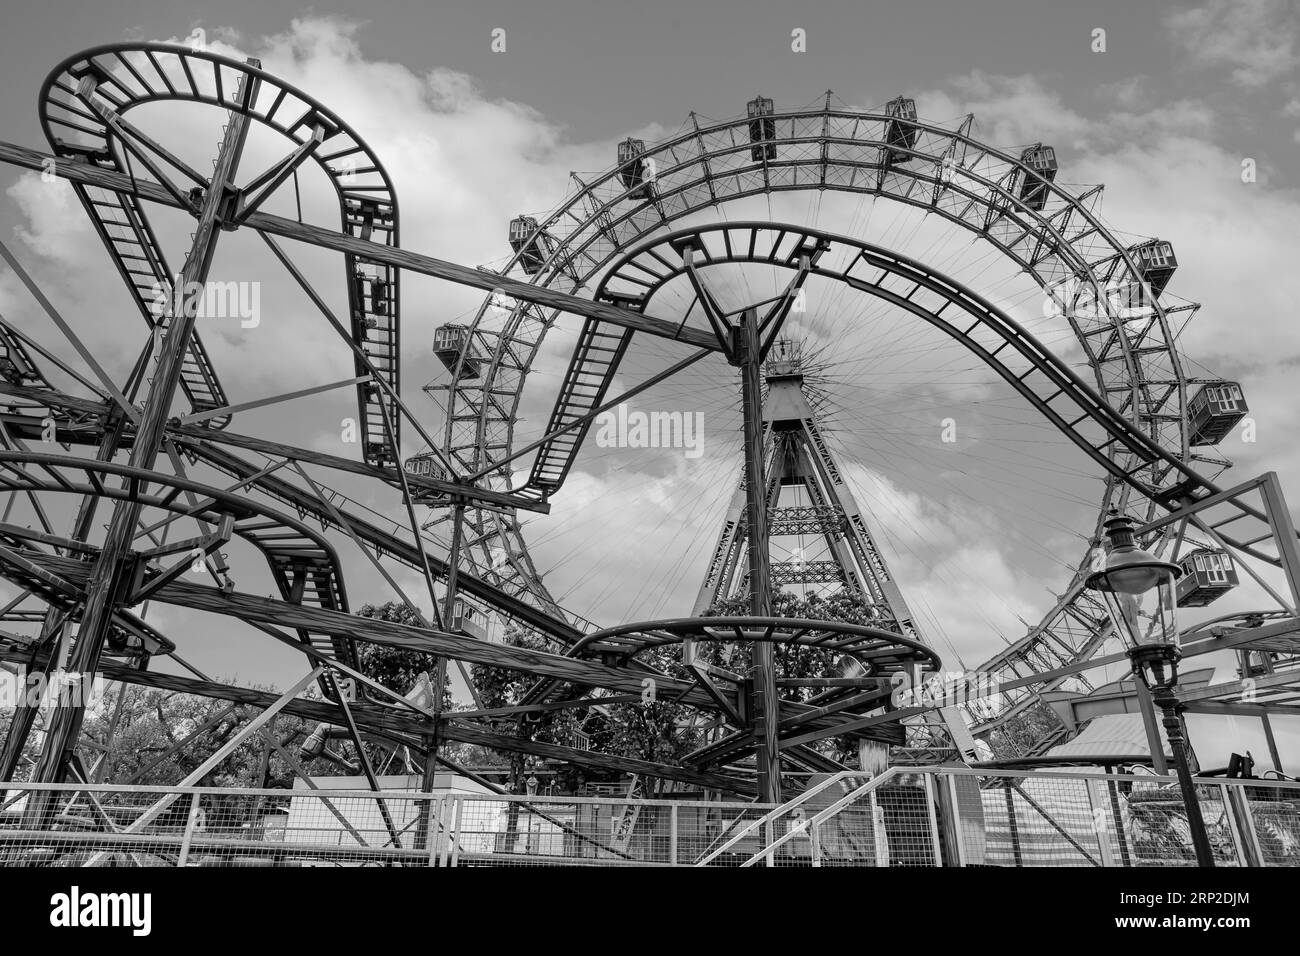 Rusty rail of an old roller coaster, in the back the Viennese Ferris wheel, black and white photo, Prater, Vienna, Austria Stock Photo